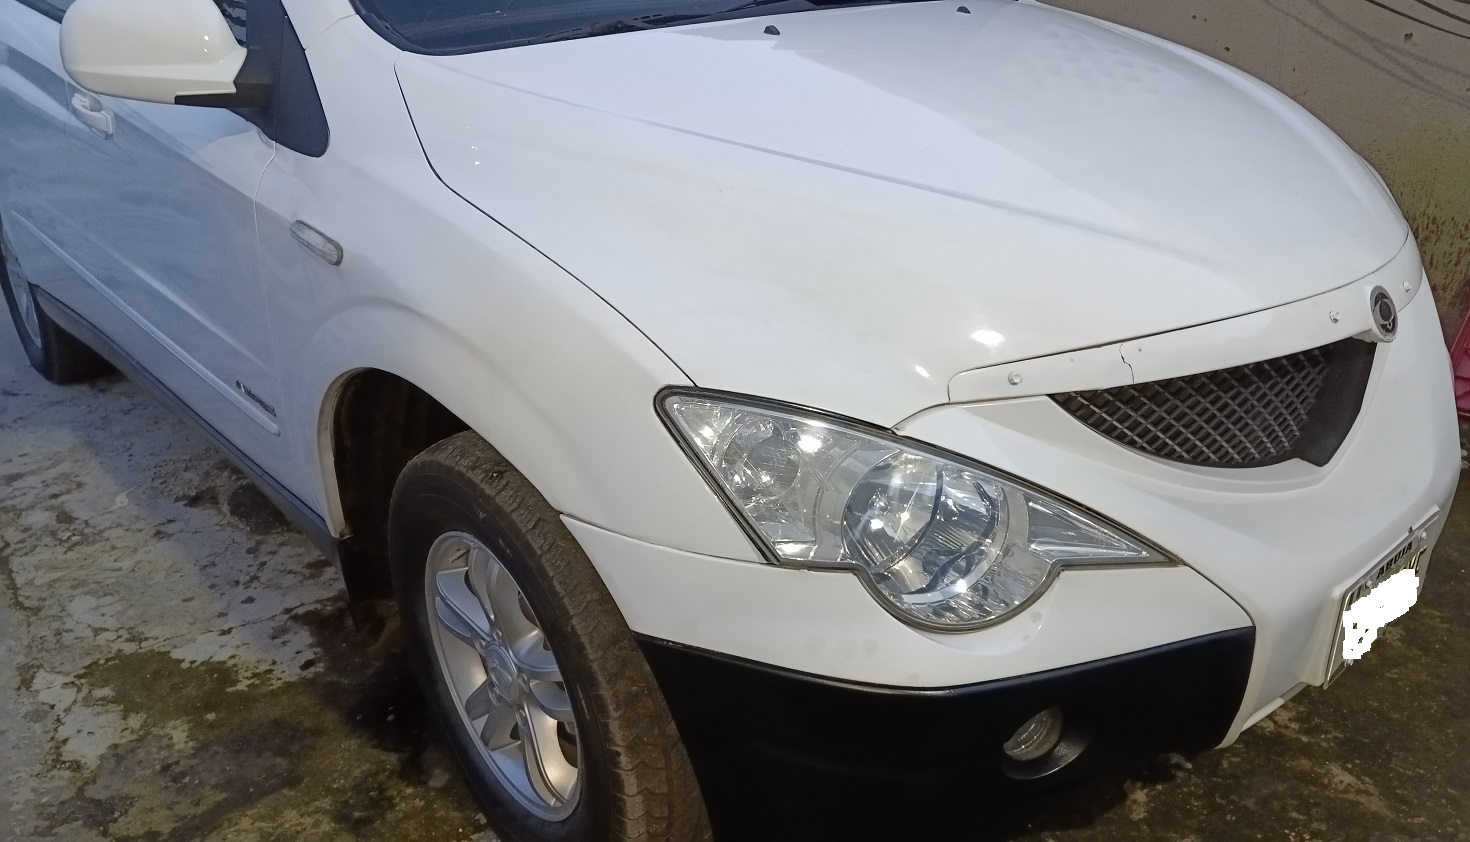 2009 White Ssangyong Actyon Pick Up Truck Available for Sale In Abuja